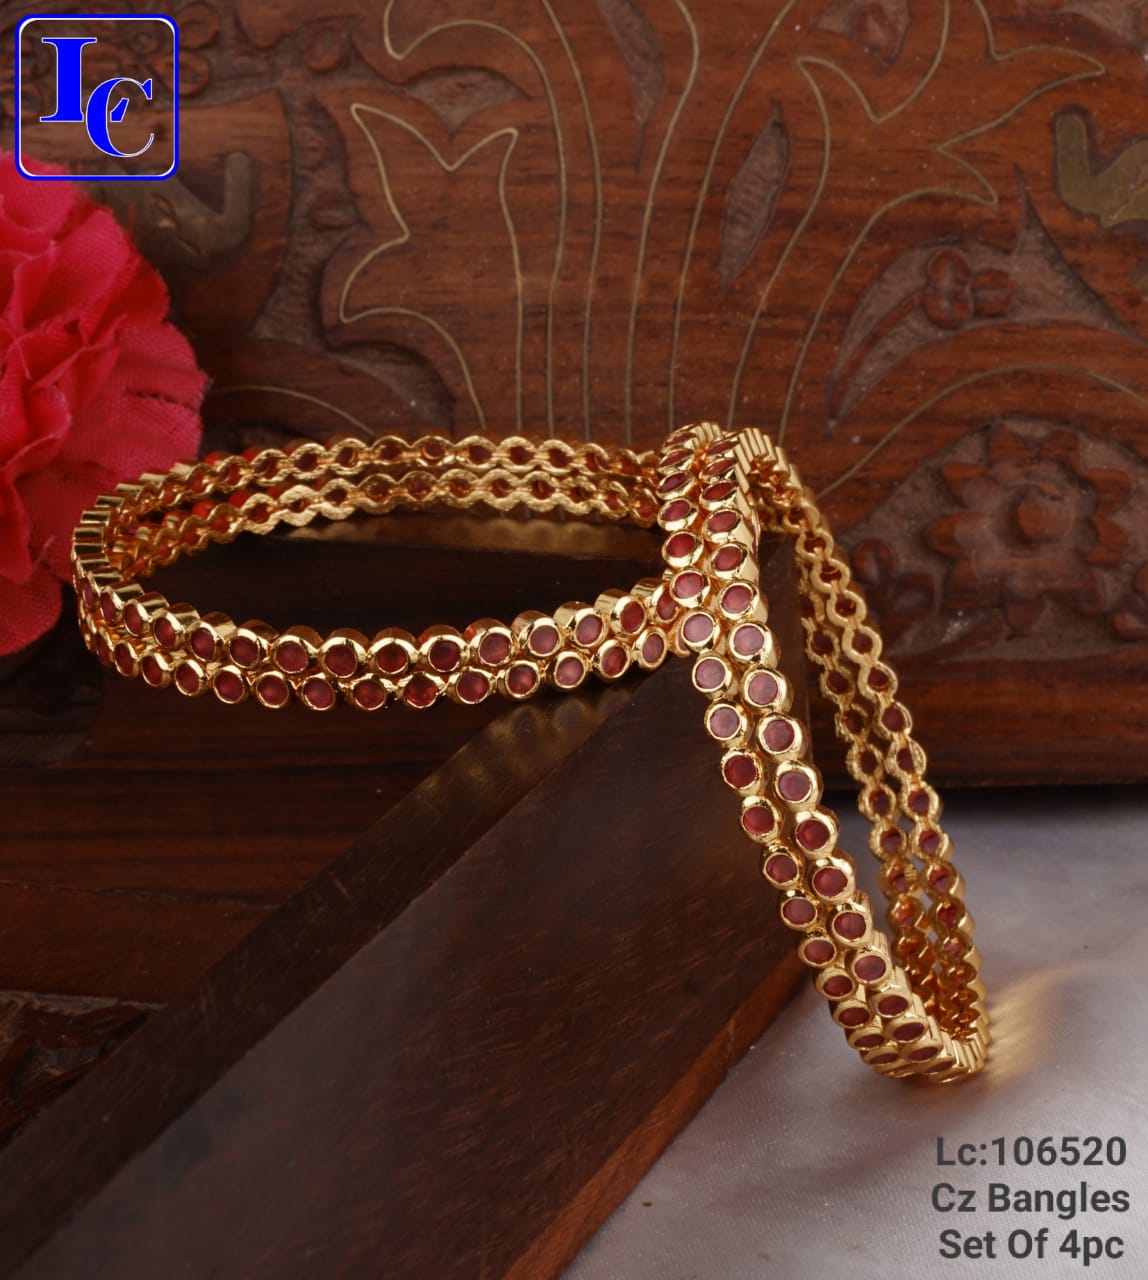 Gold Bangles Collection June 11 2021 - Indian Jewelry Designs